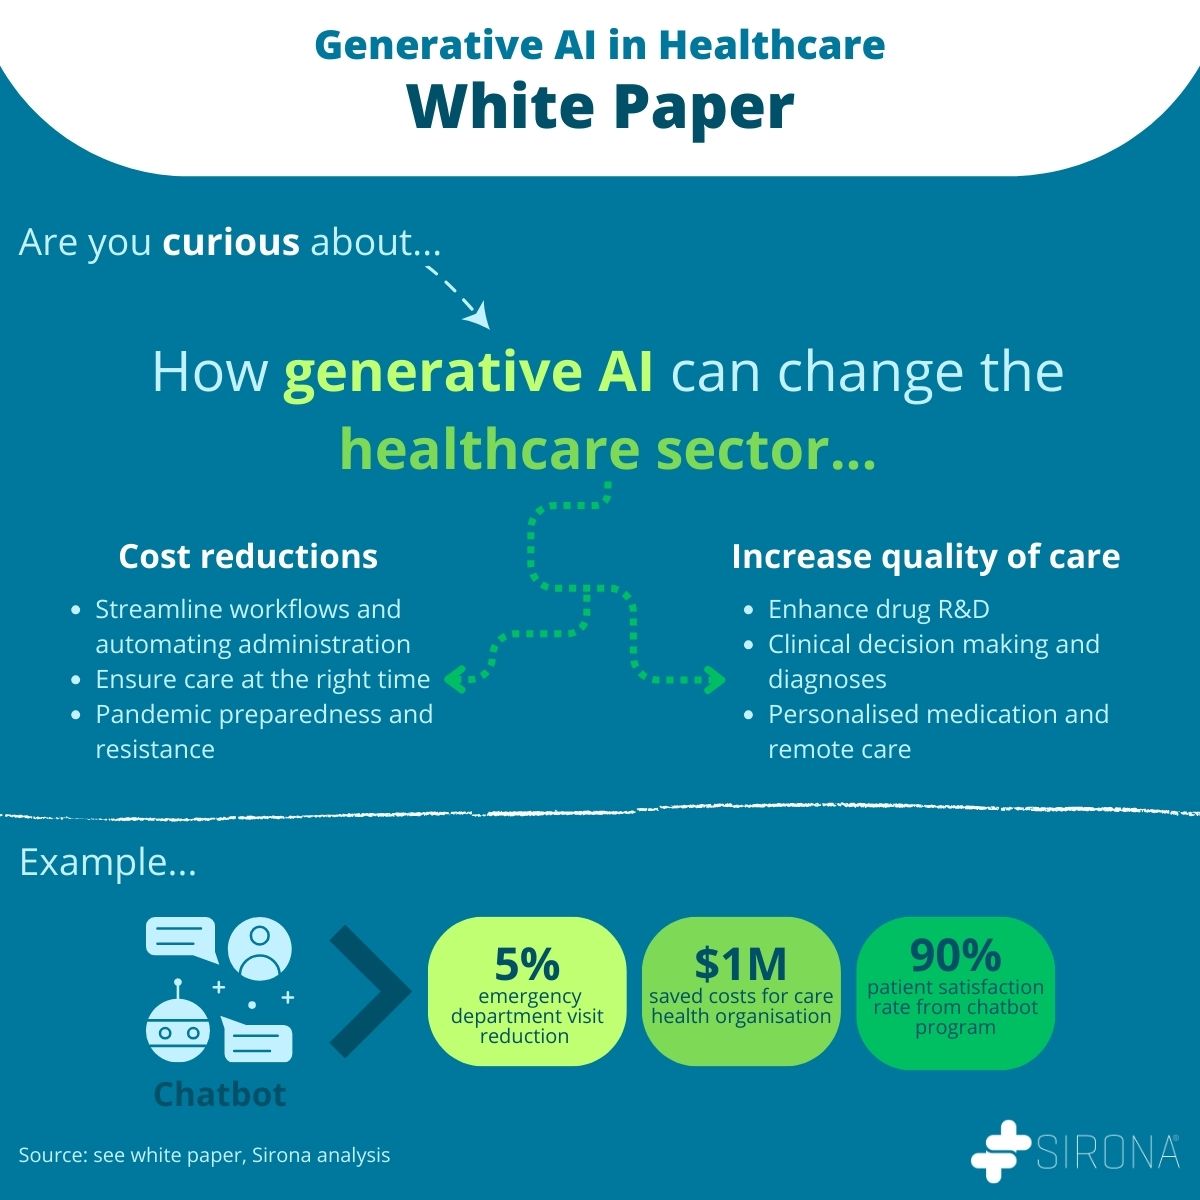 How can generative AI have a positive impact on healthcare?